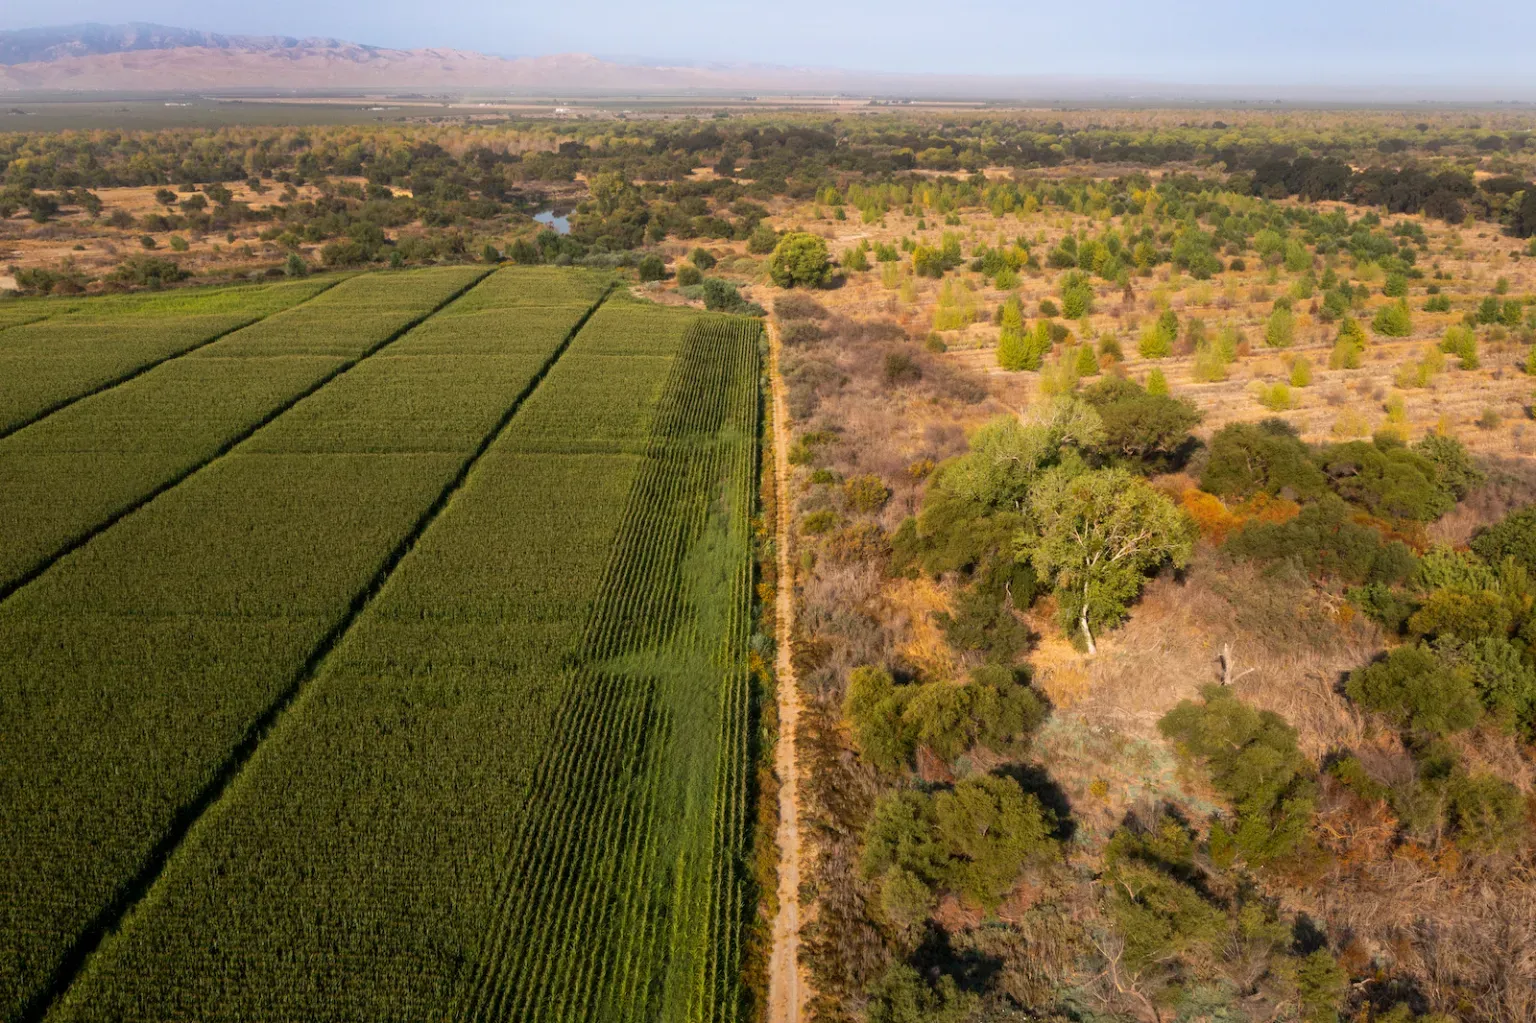 An aerial view: at left, neat rows of green crops. At right, a natural treed area